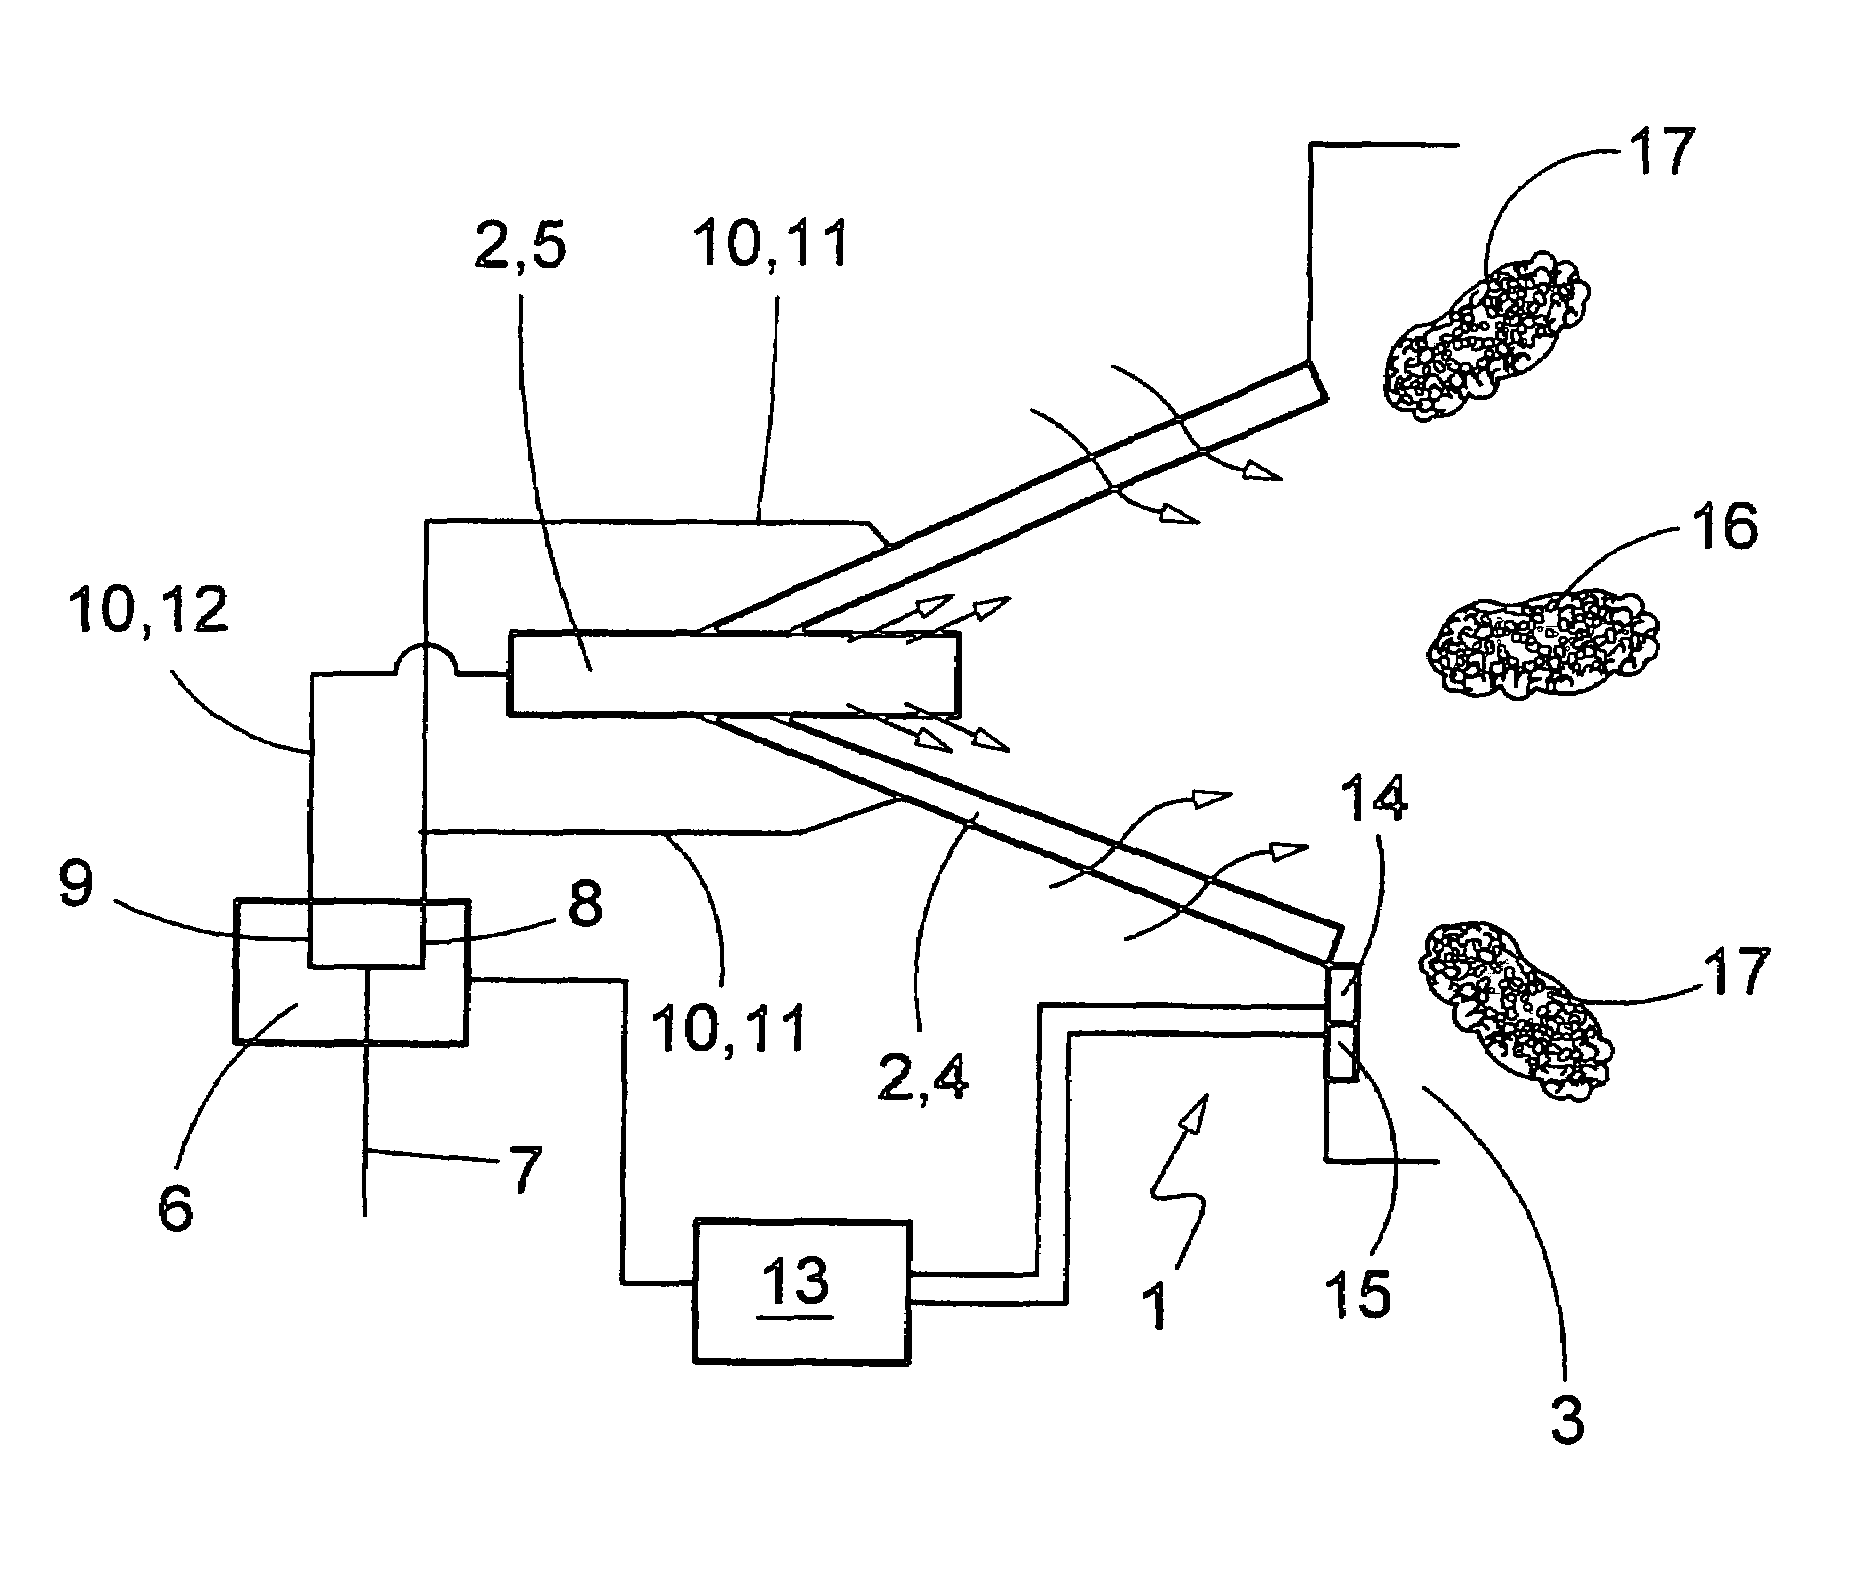 Method for operating a furnace